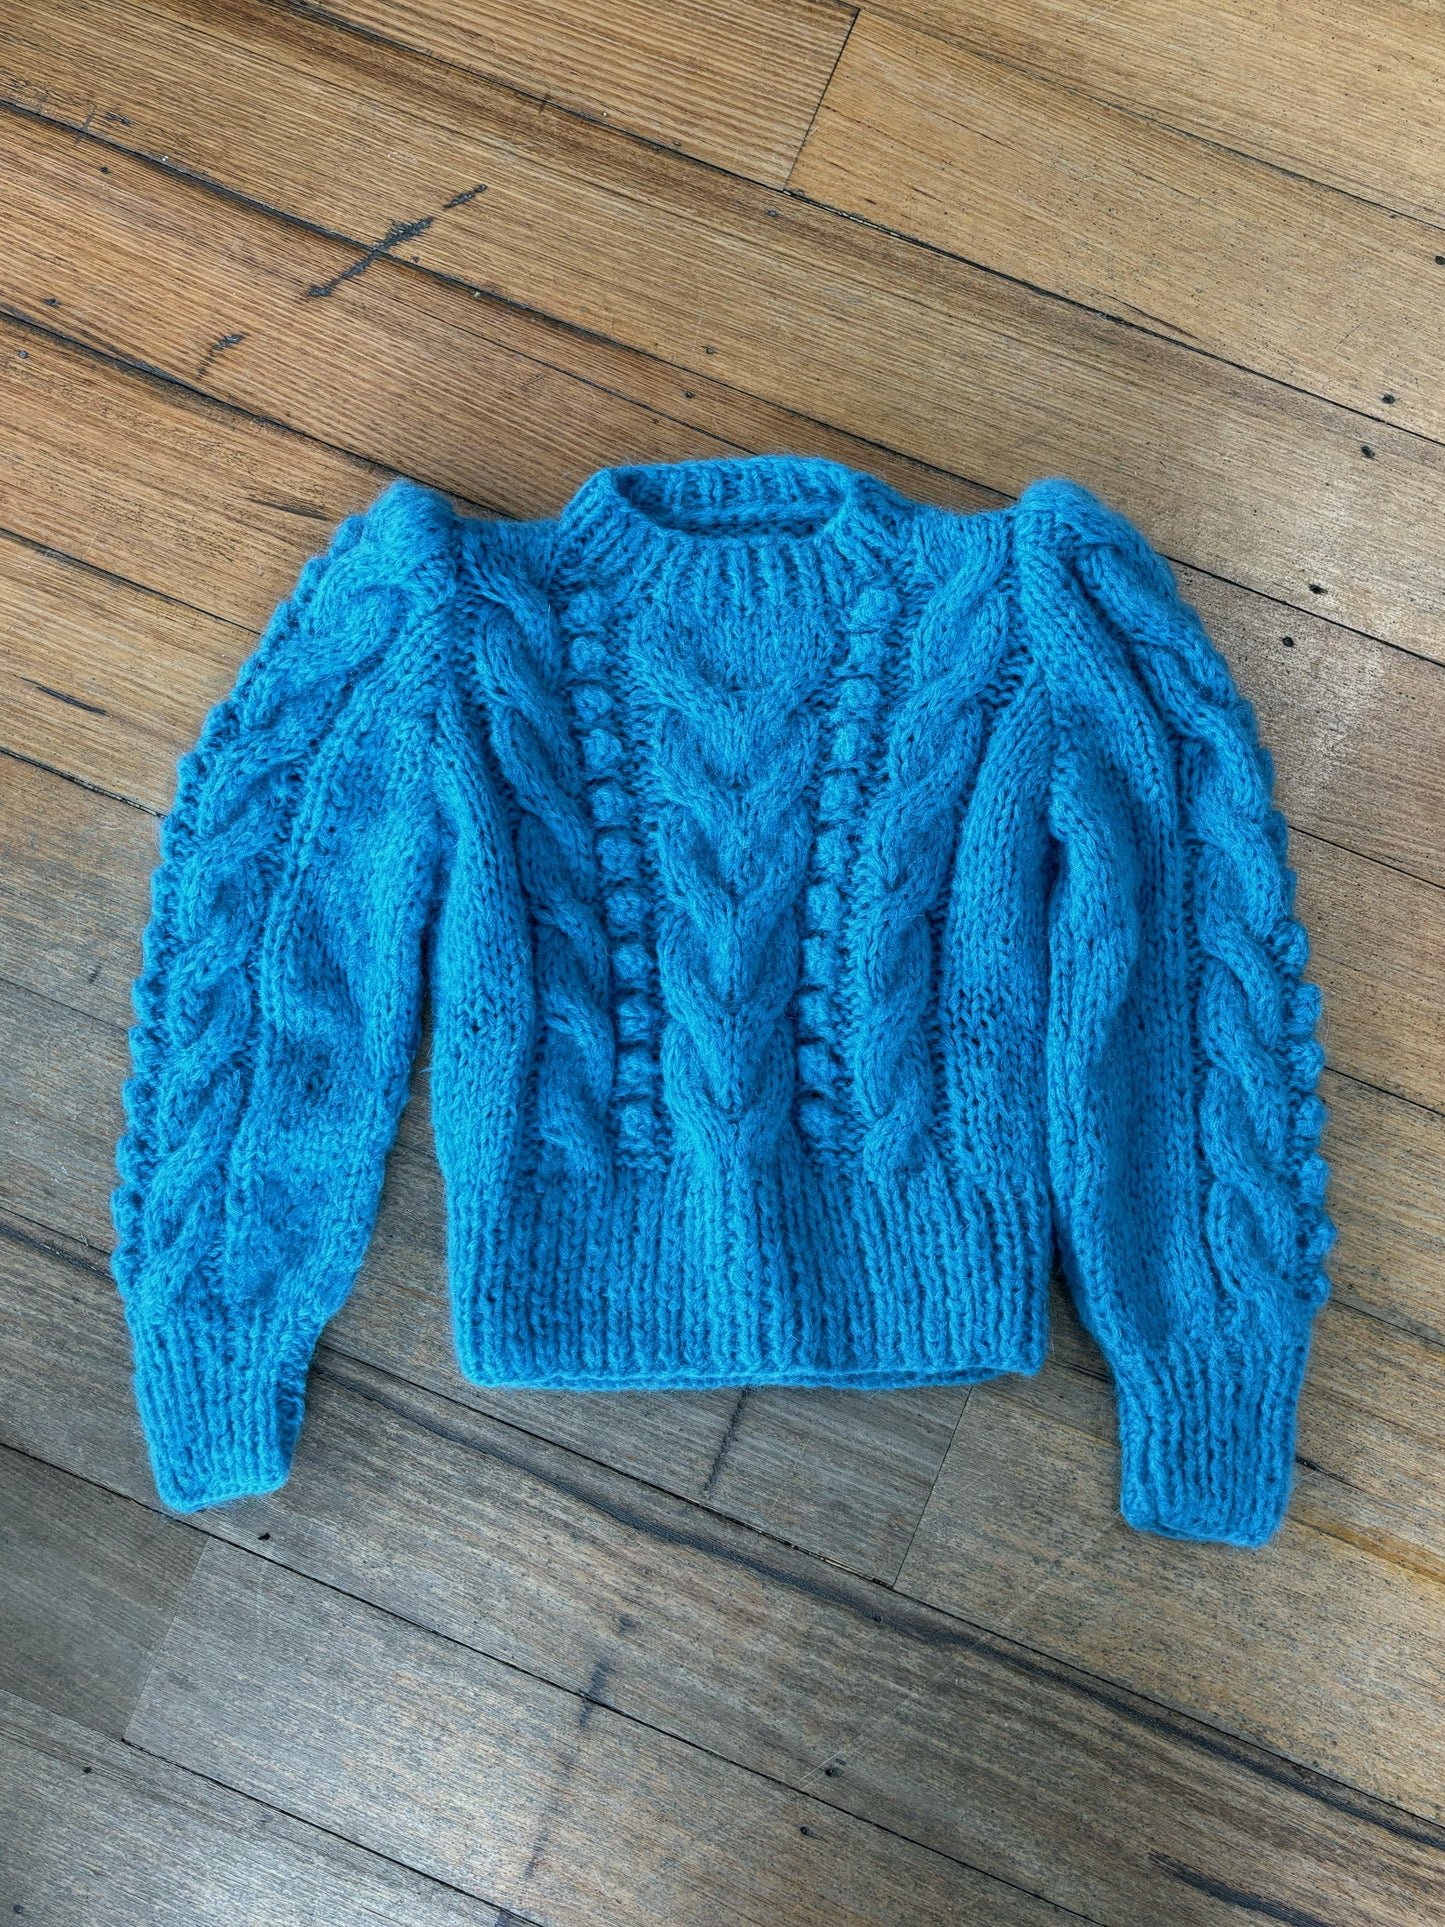 DAWN X DARE - FANTINE CABLE HANDKNIT - MADE IN ITALY (2 COLOURS)